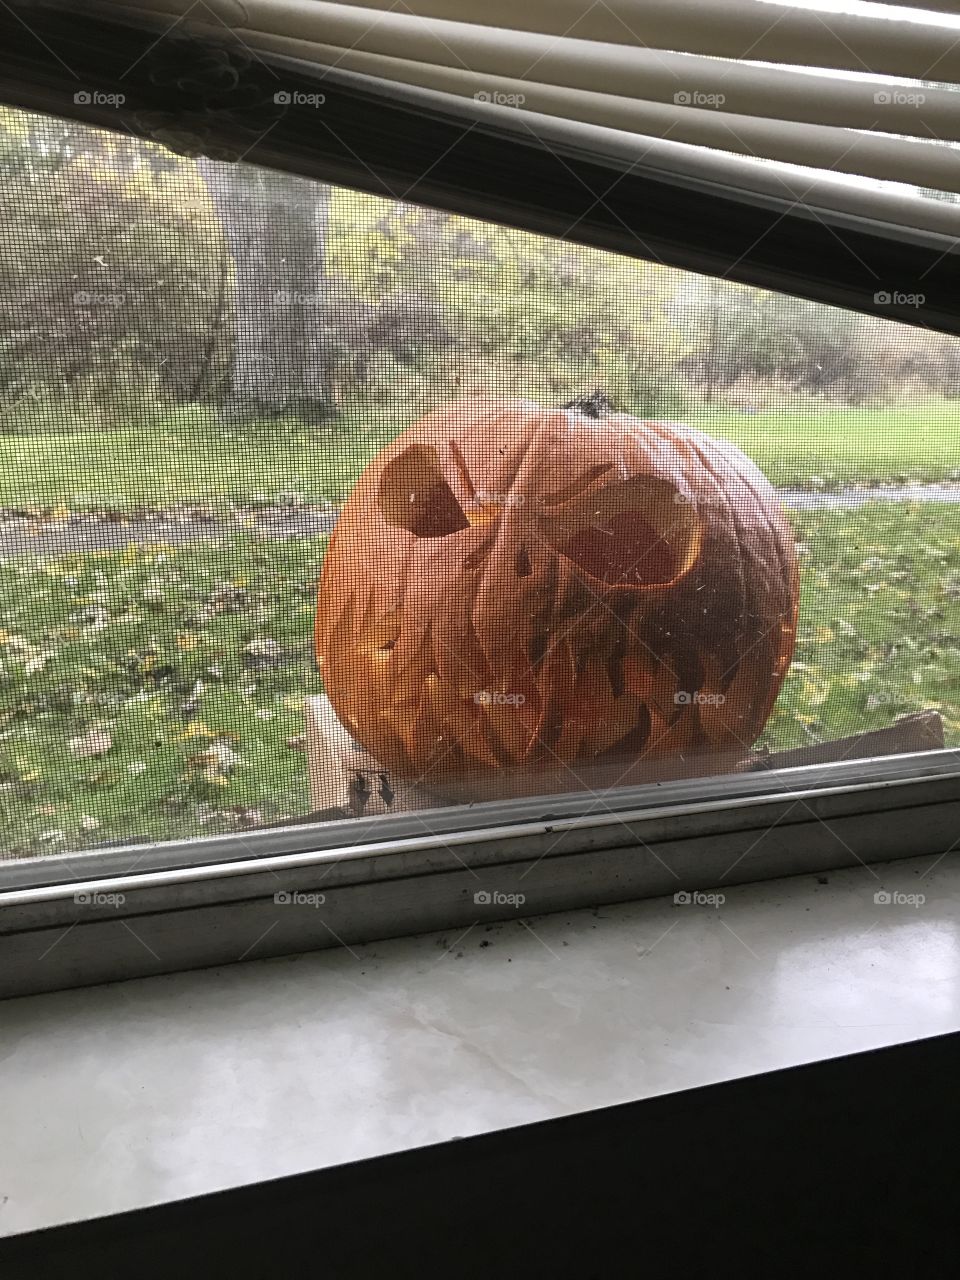 Carved pumpkin in the window 